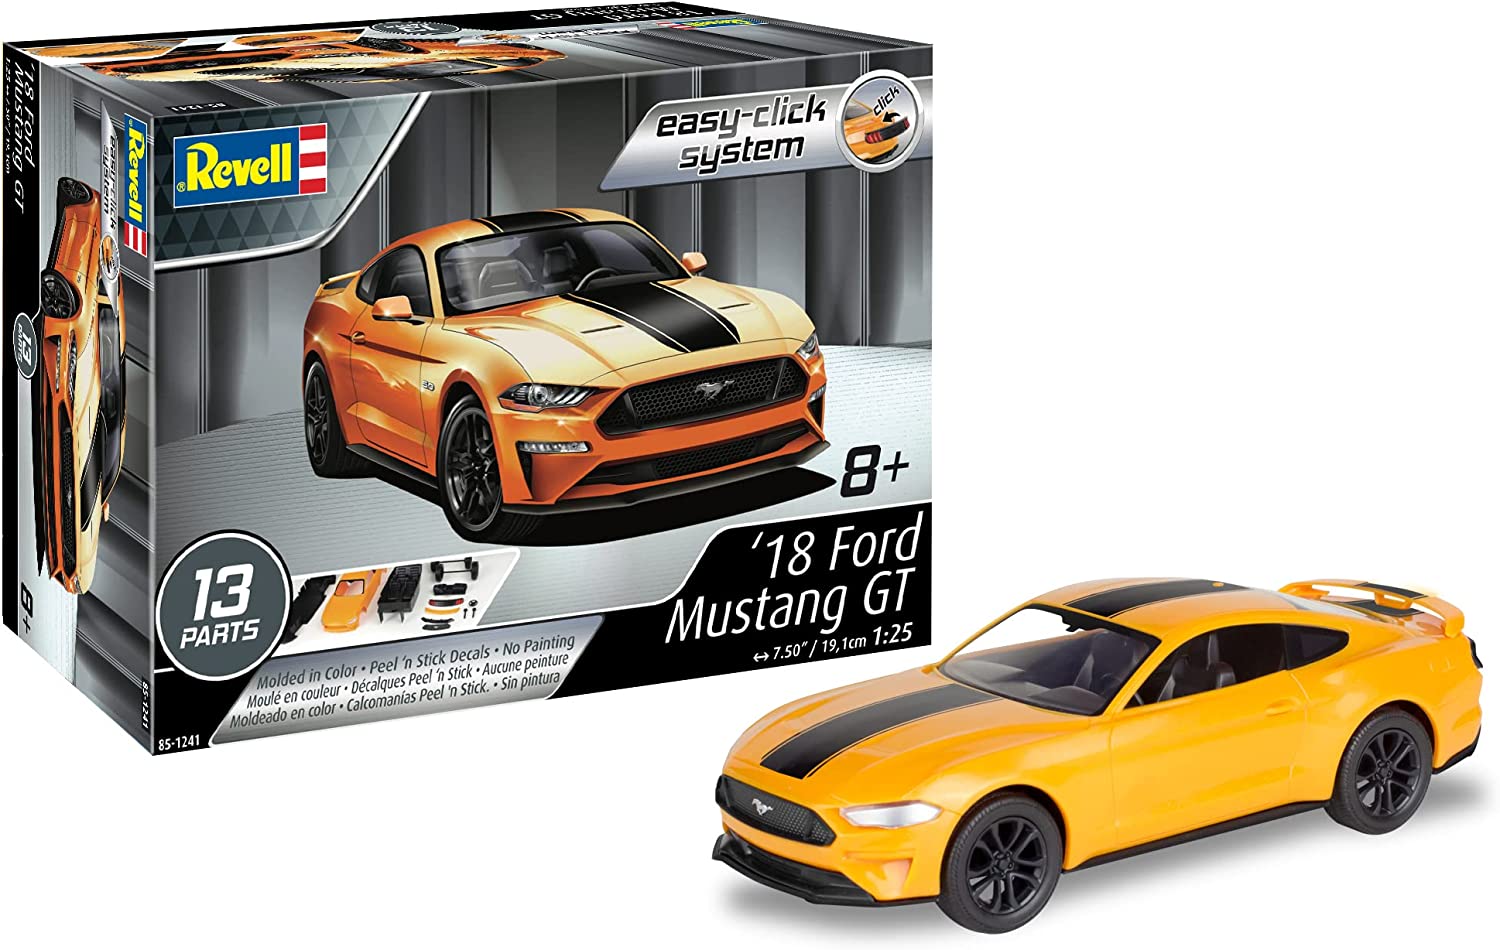 REVELL 85-1241 1/25 2018 Ford Mustang GT